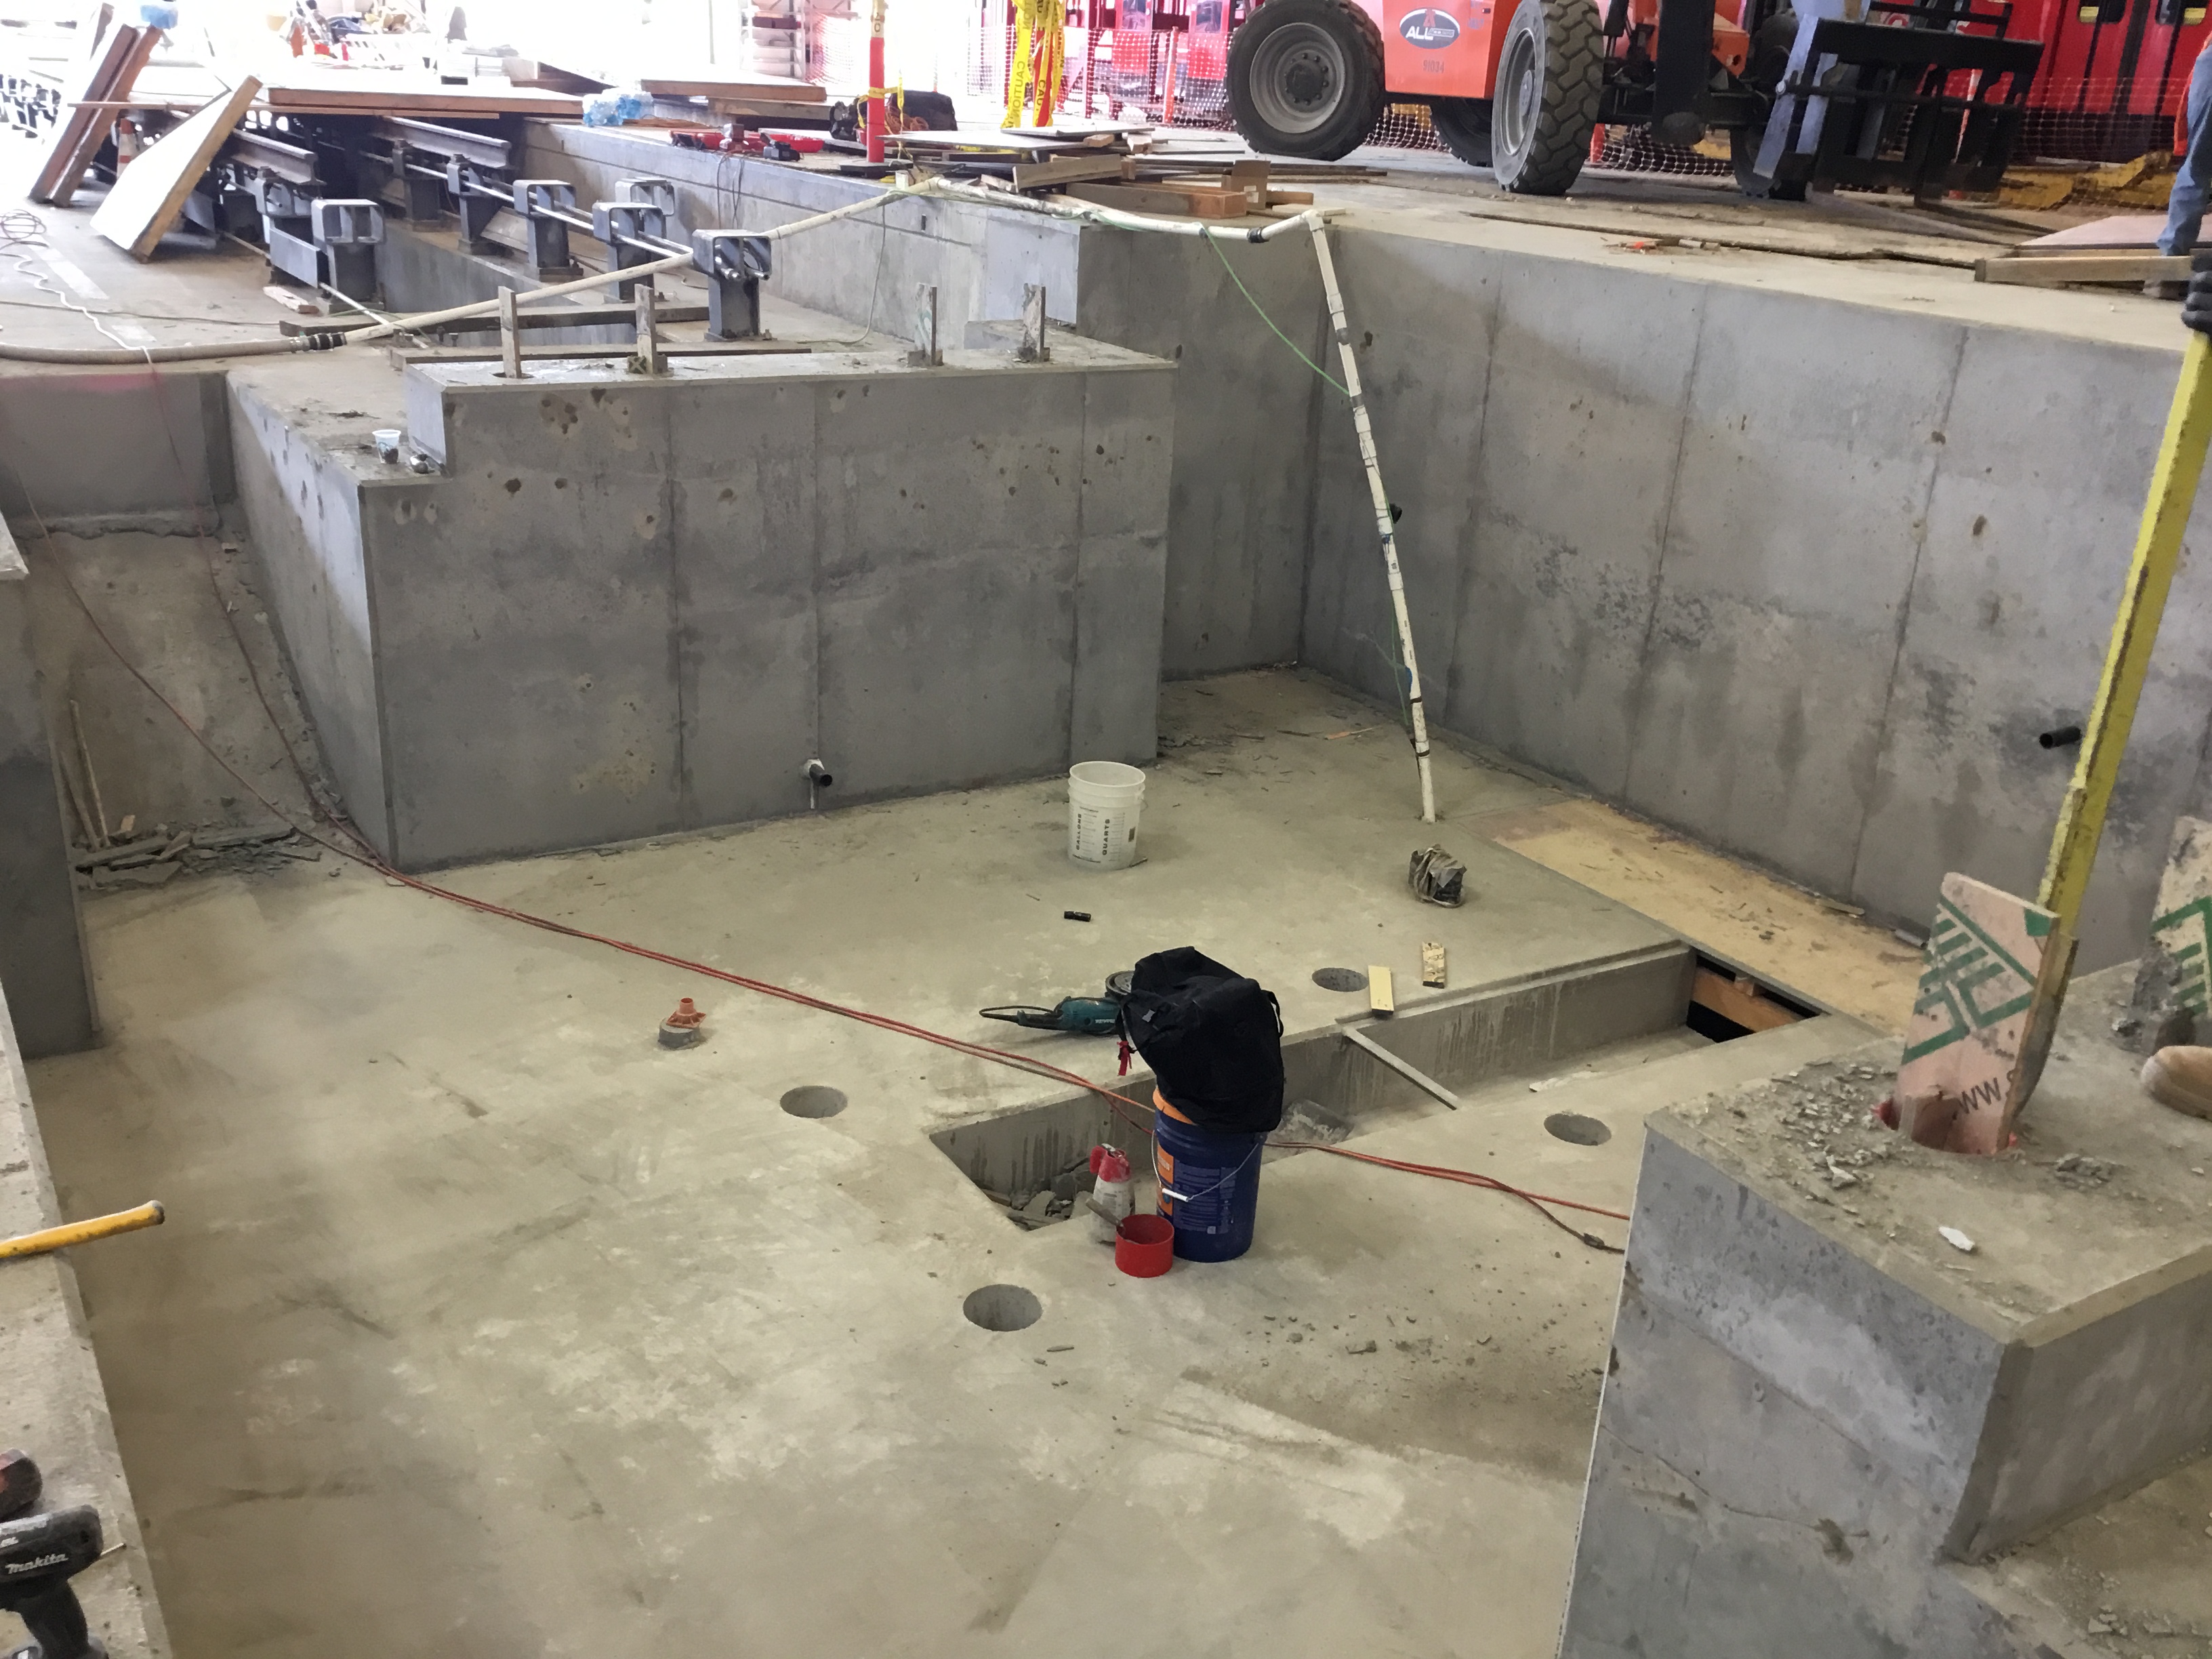 Better than a membrane: The pour is done and the new PENETRON-treated MTS wheel truing pit is dry and durable – quicker and more cost-effective than the originally specified membrane.